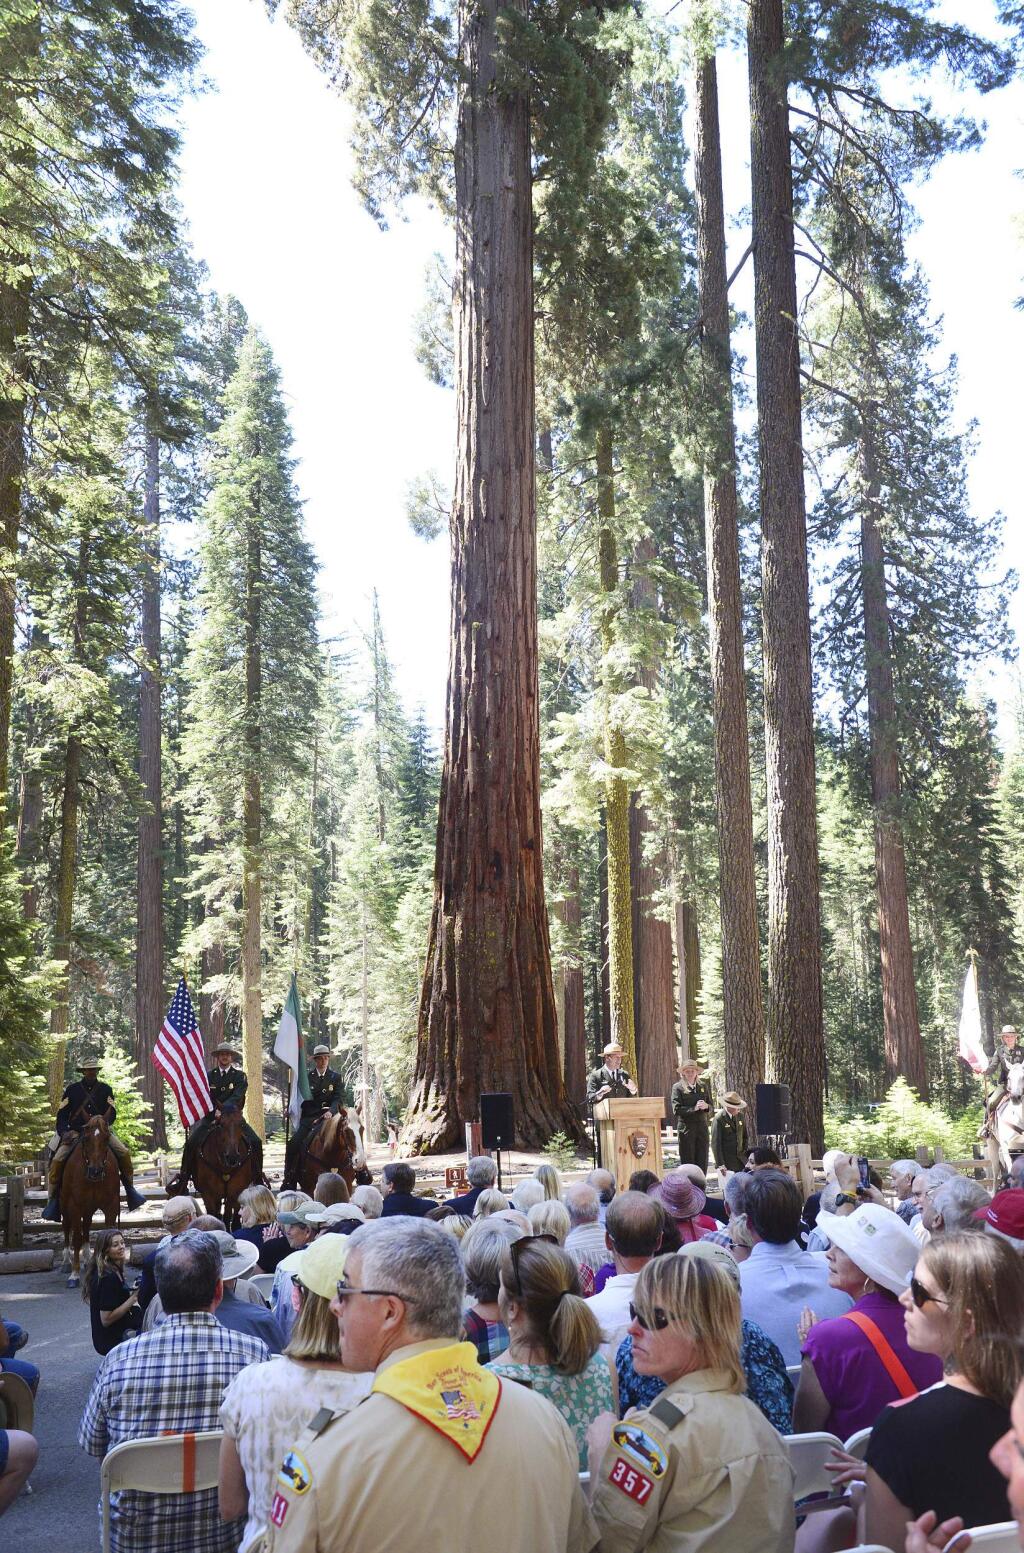 File - In this June 30, 2014 file photo, a giant sequoia in the Mariposa Grove serves as a backdrop for the Yosemite Grant sesquicentennial ceremony at Yosemite National Park, Calif. Yosemite National Park says the largest sequoia grove is ready to open to the public after crews completed a restoration project to protect the nearly 500 ancient trees. Park officials say Mariposa Grove, a 4-acre (1.50-hectare) habitat of the towering reddish-brown trees, will open Friday, June 15, 2018, after being closed for three years. (Craig Kohlruss/The Fresno Bee via AP, File)